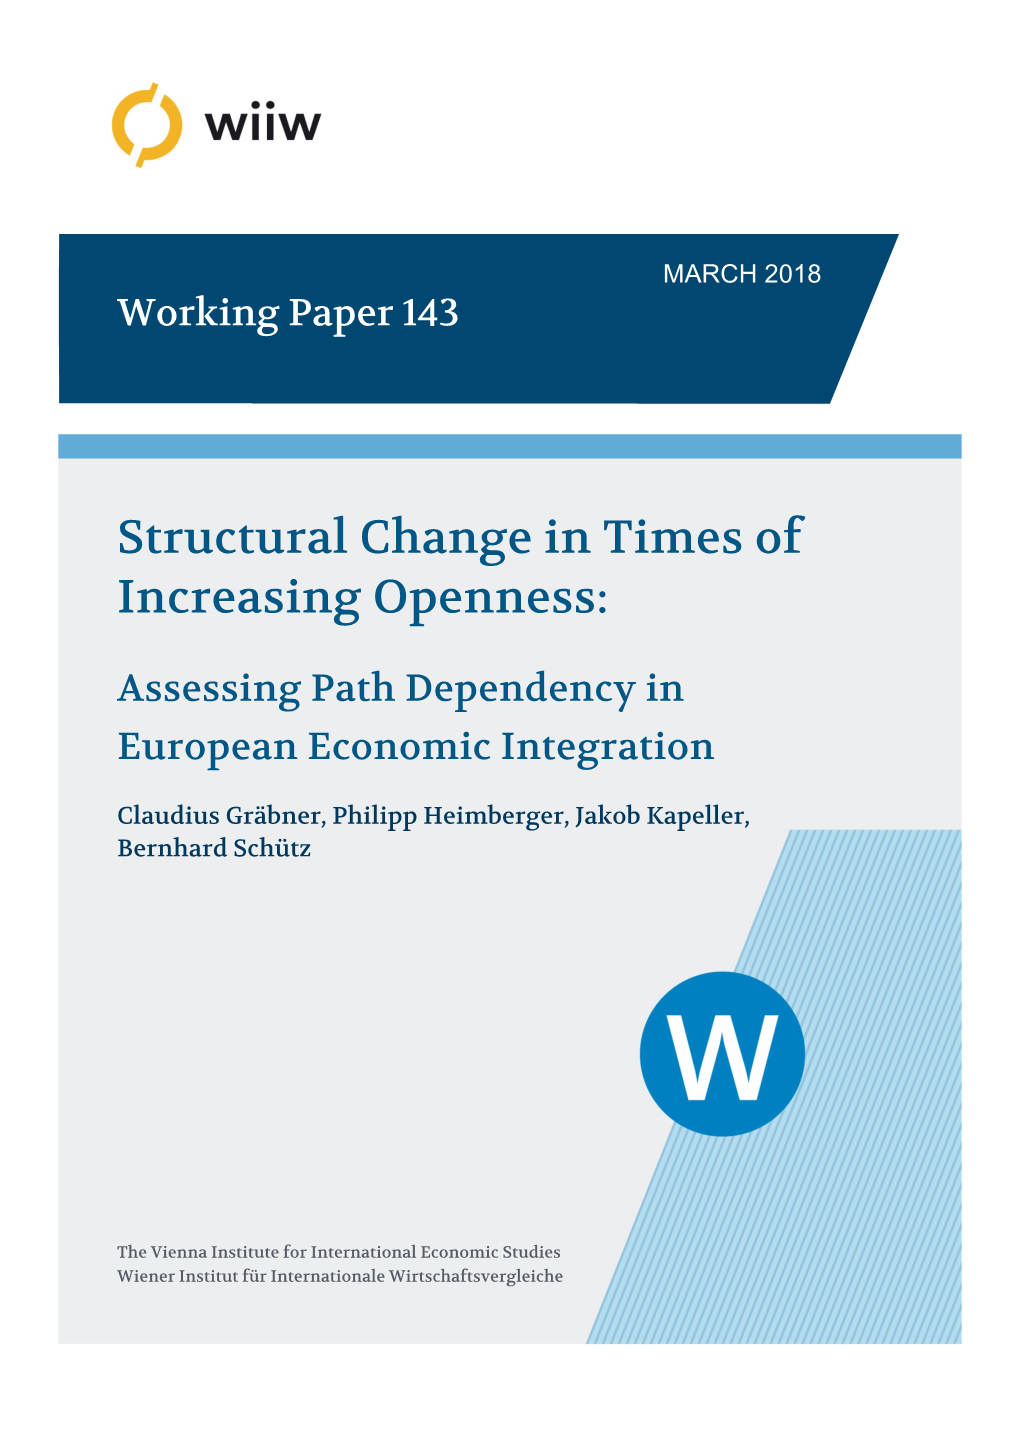 Structural Change in Times of Increasing Openness